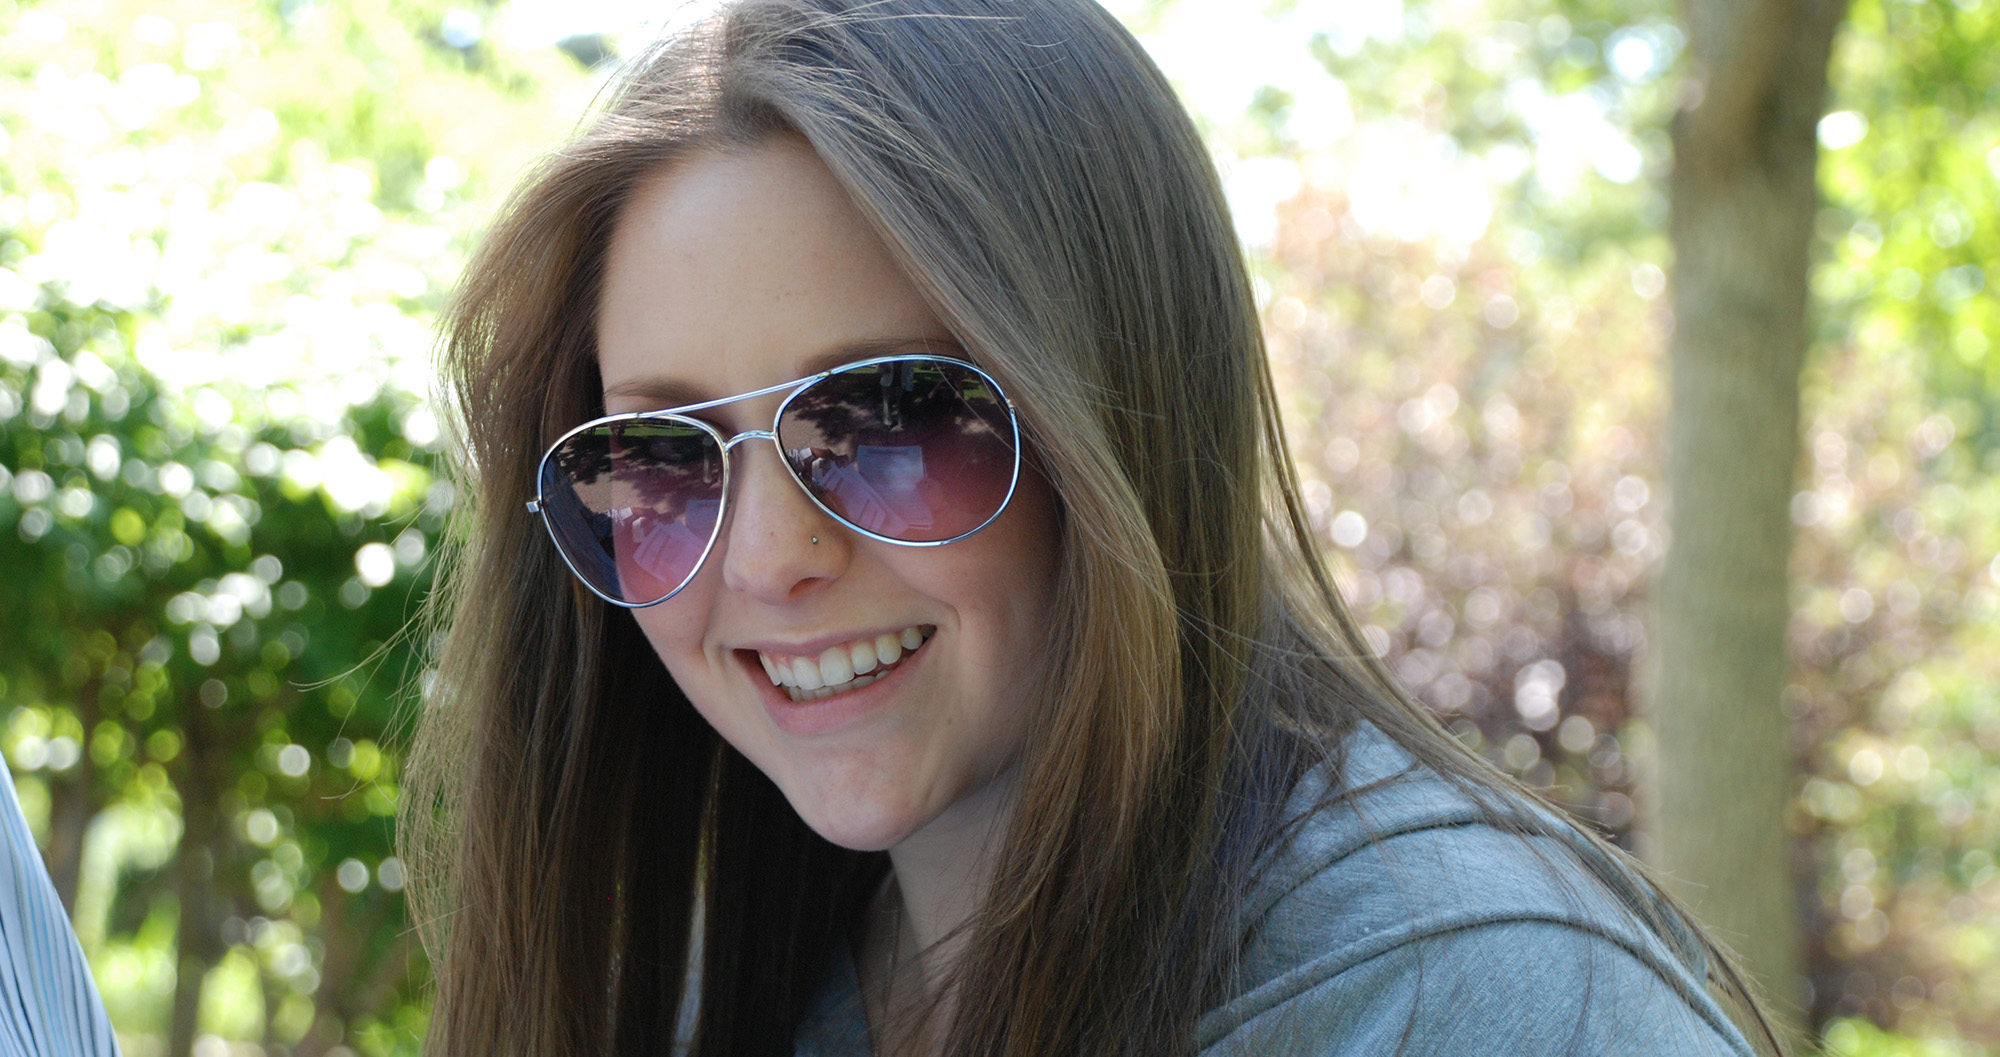 Young female student outside in sunglasses smiling